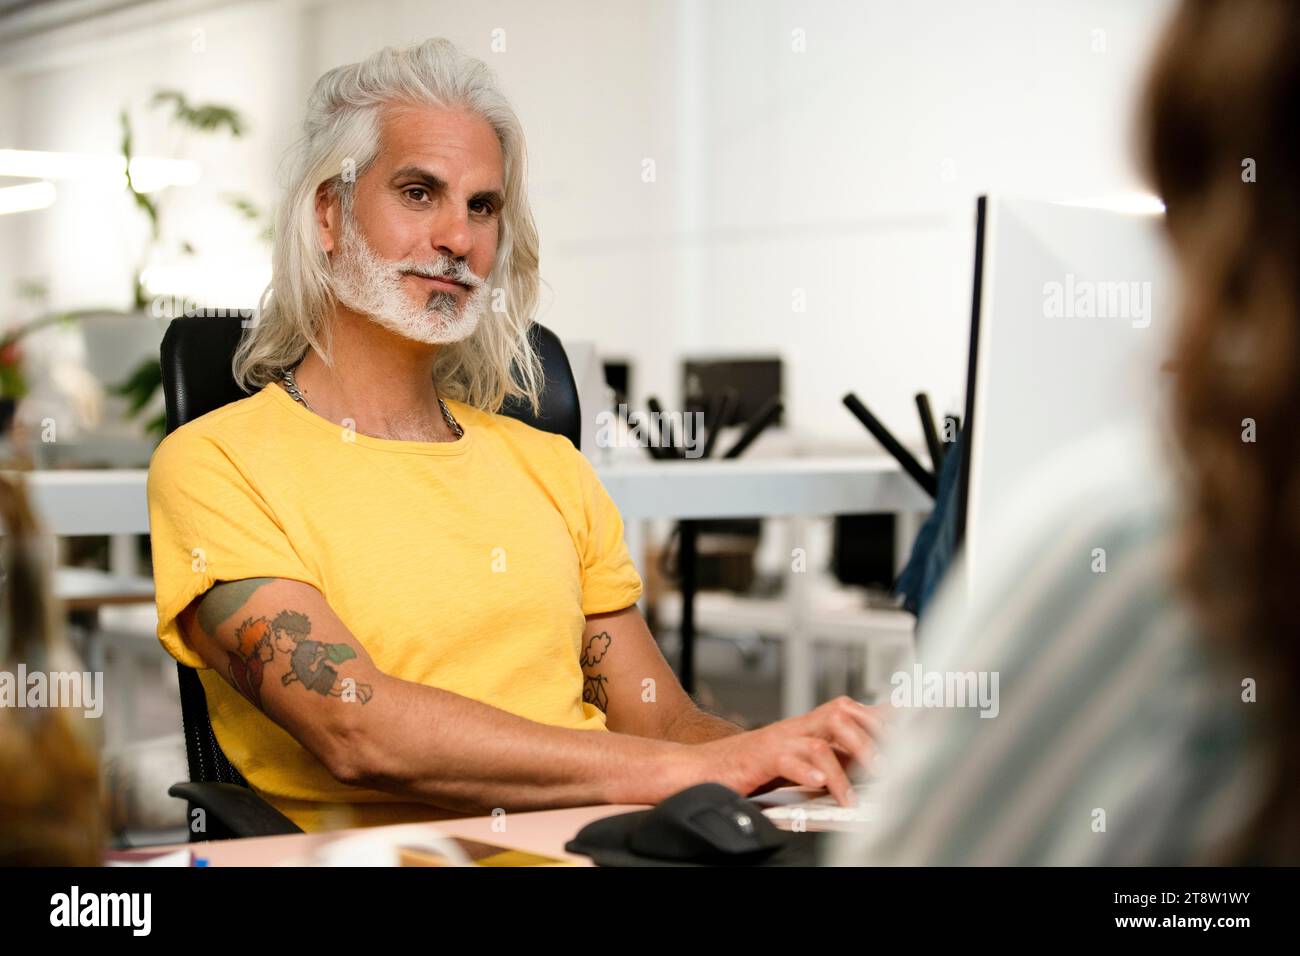 Computer programmer using computer while listening to coworkers Stock Photo